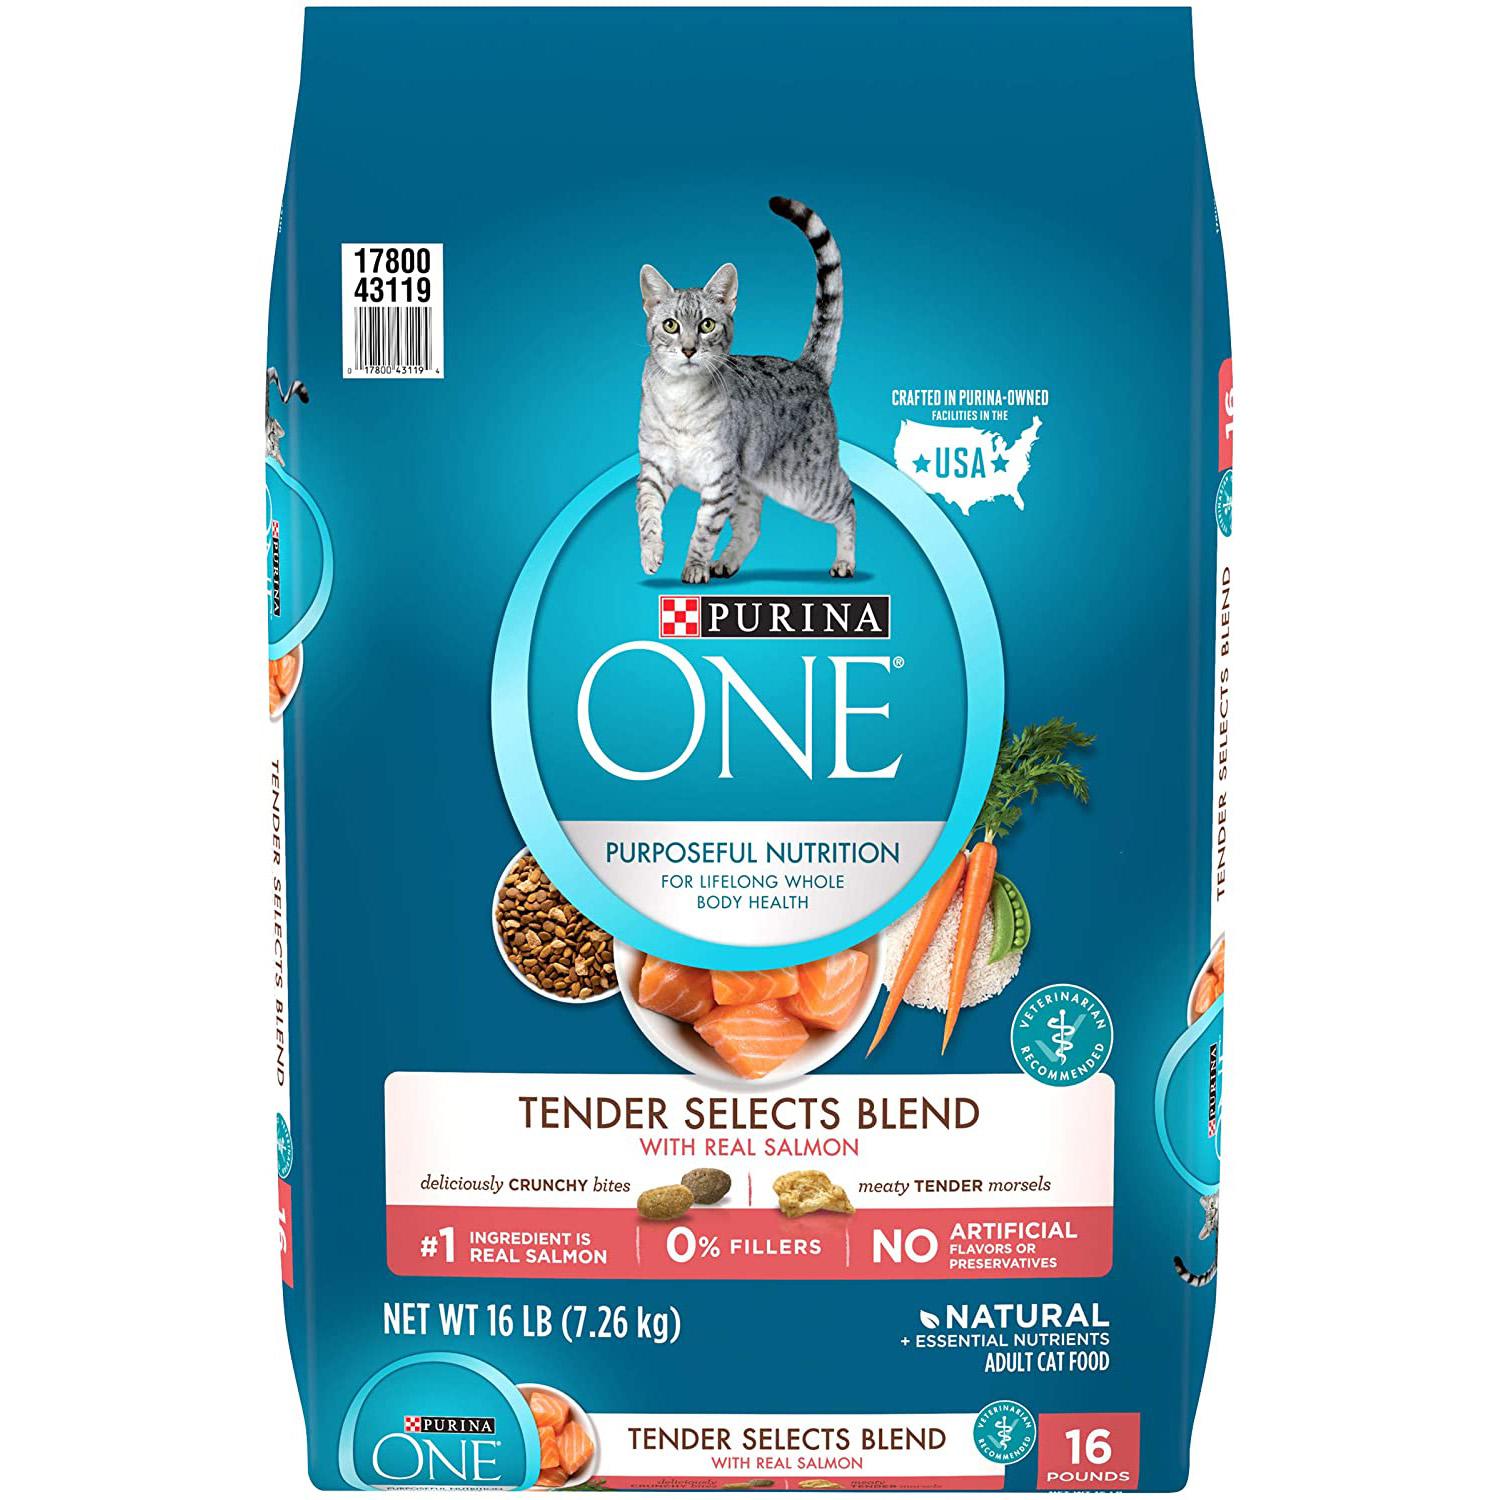 Purina ONE Tender Selects Blend Adult Dry Cat Food for $13.85 Shipped